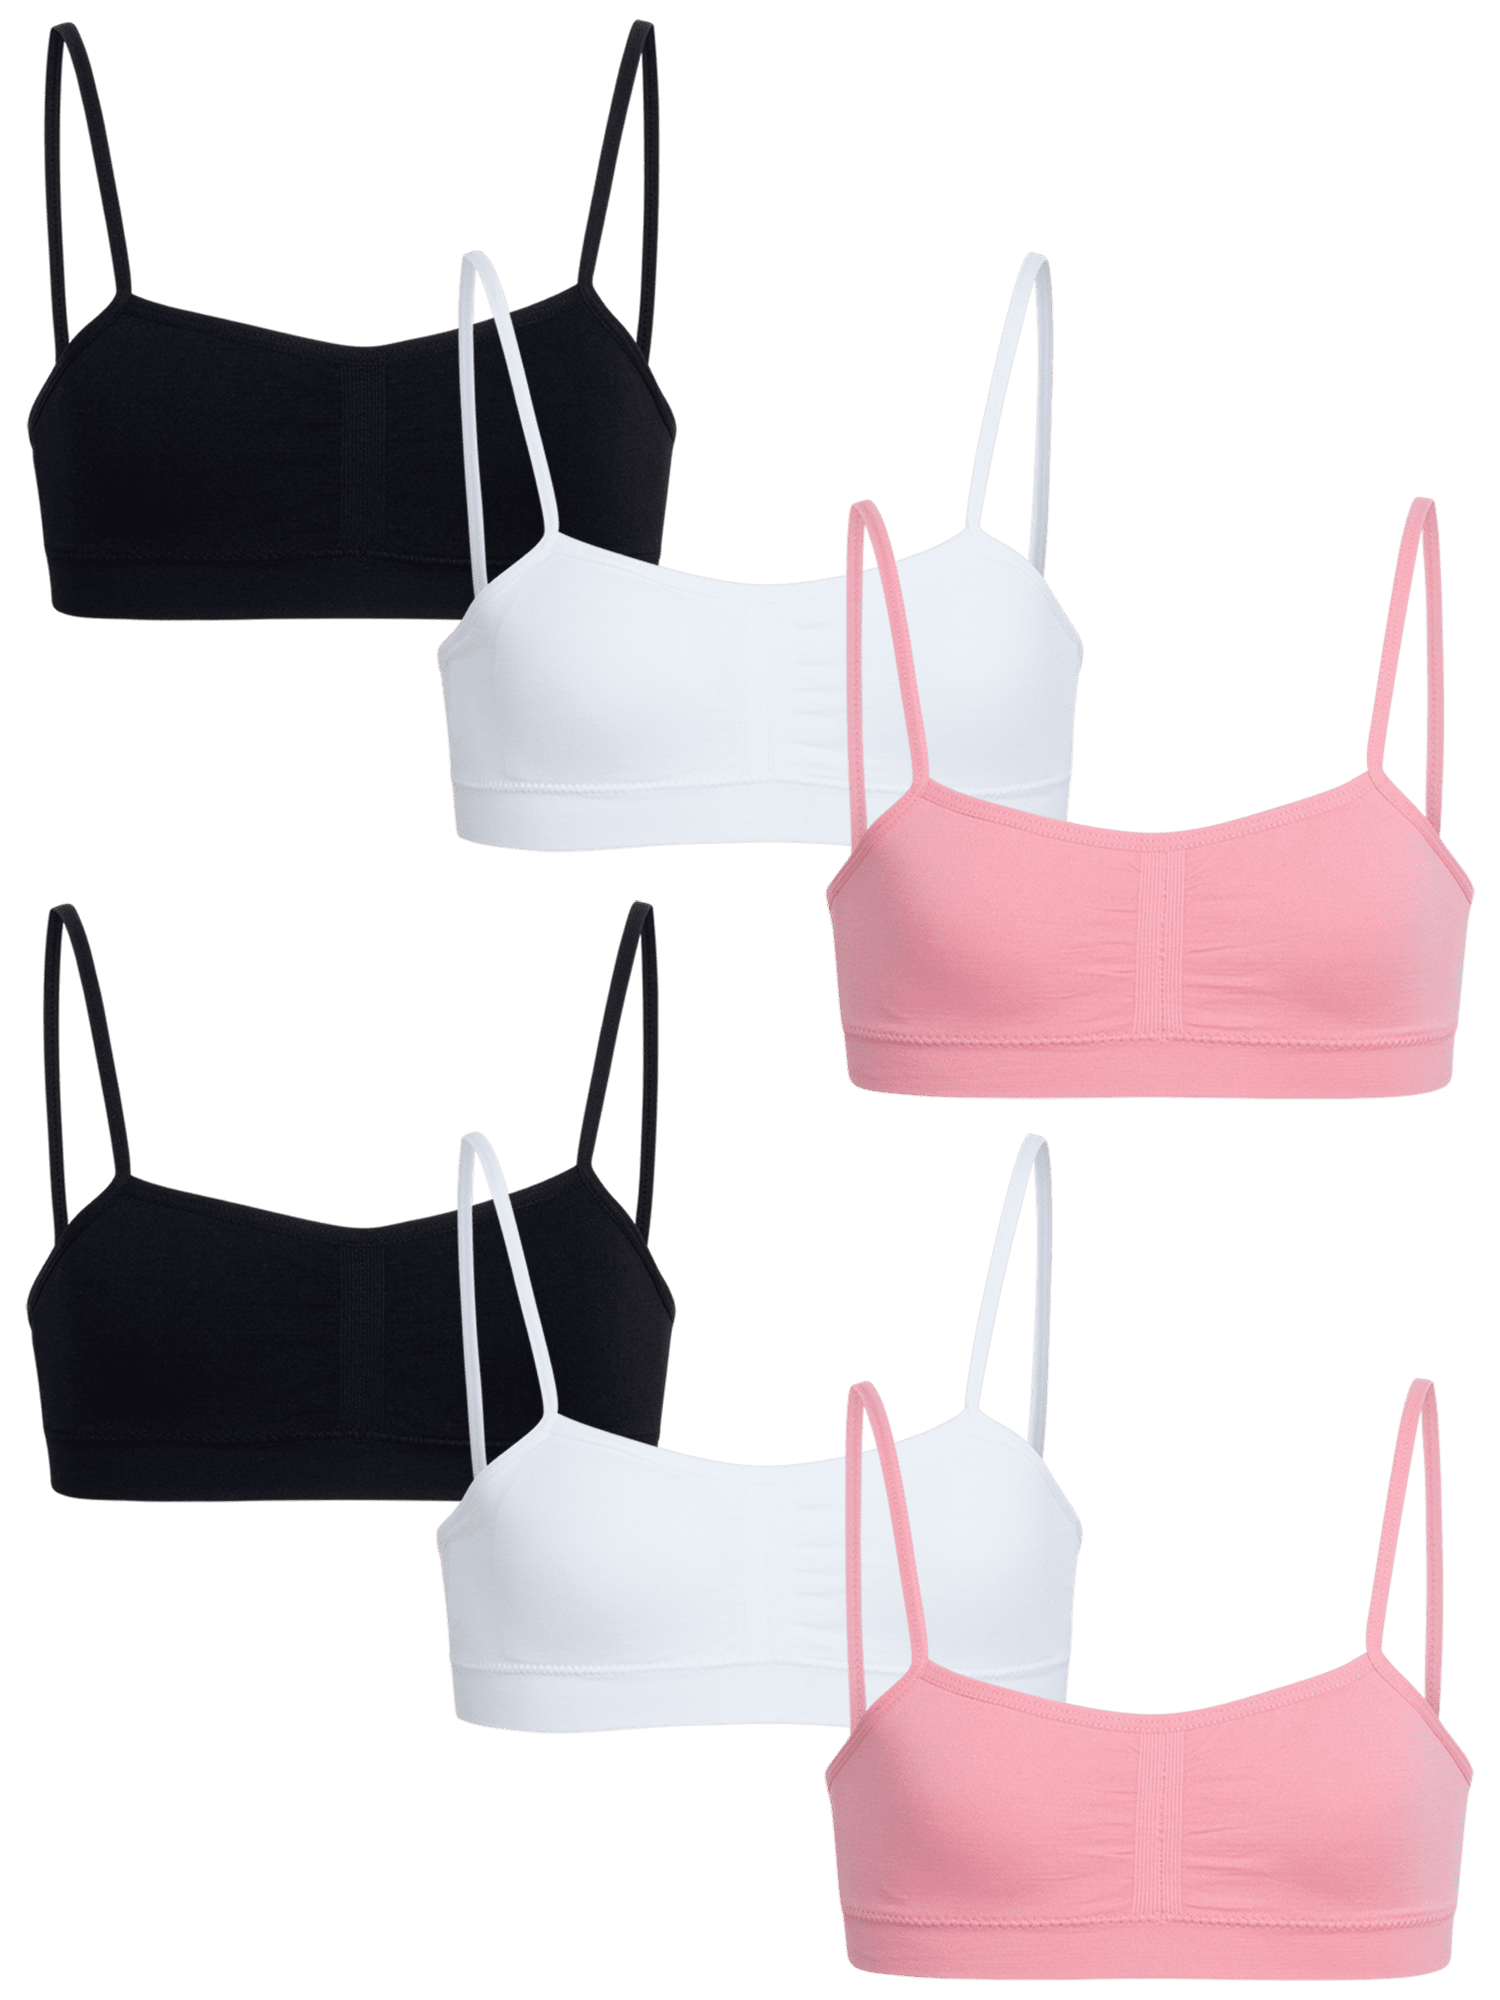  Sweet & Sassy Girls' Training Bra Set - 8 Piece Seamless Cami  Bralette and Underwear, Size Small, Charcoal/Pink/Brown/Cream Solids:  Clothing, Shoes & Jewelry